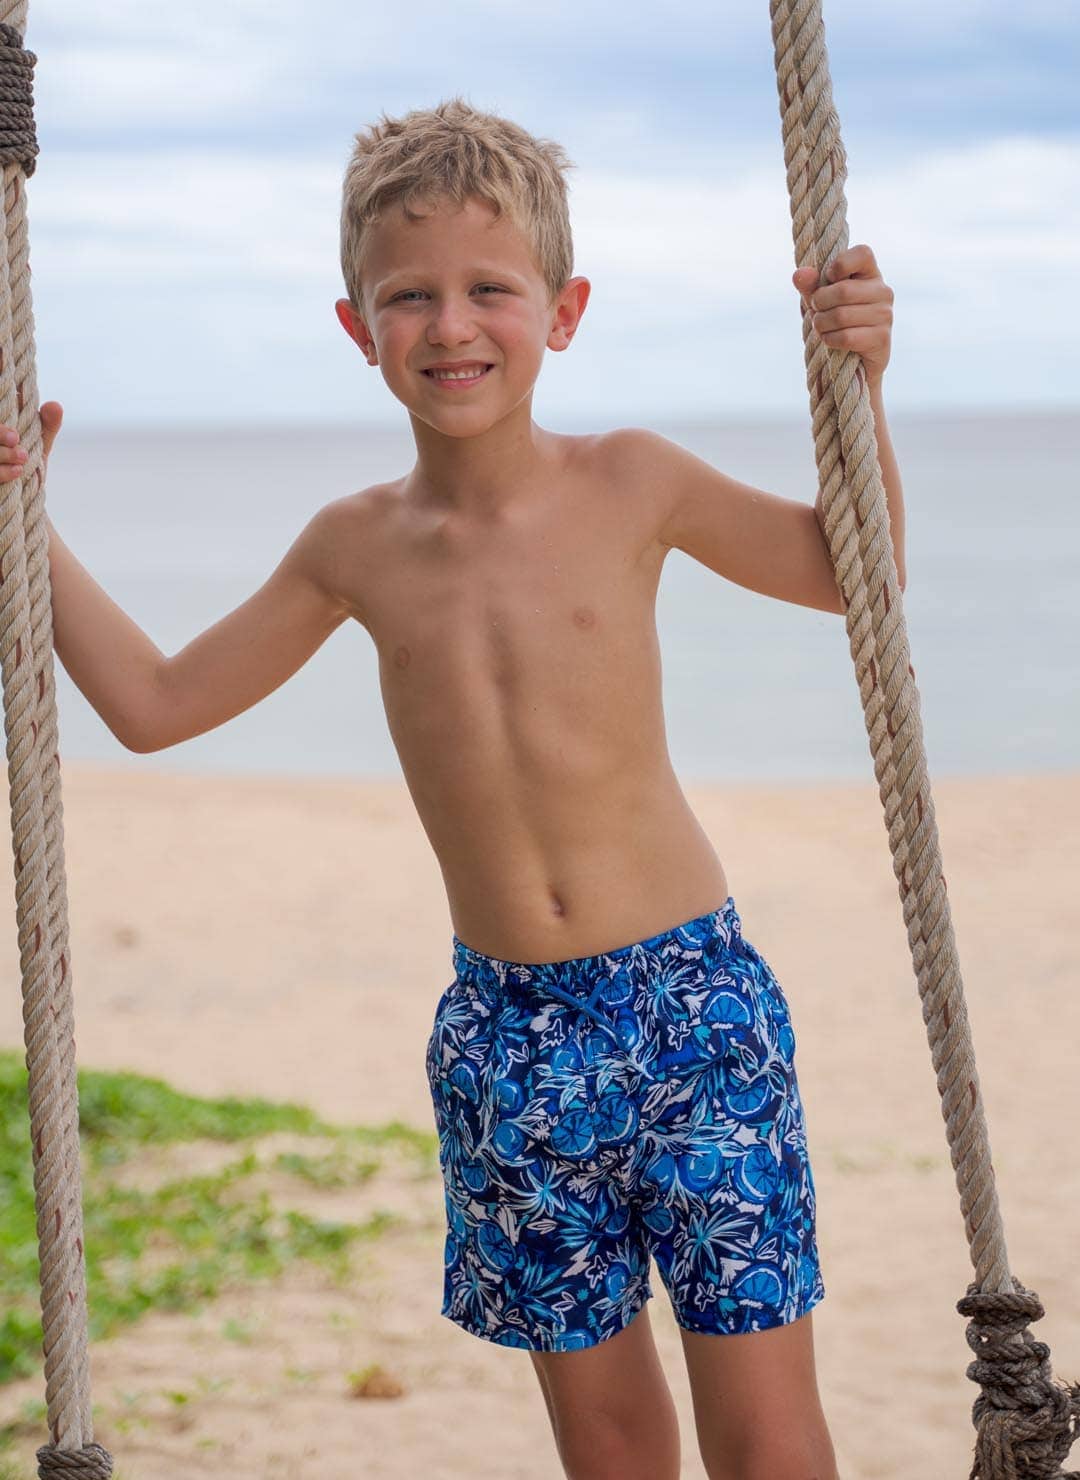 Comfort is Key in Boys' Boardshorts and Girls' One-Piece Swimsuits | Kidswear Boys | Caha Capo